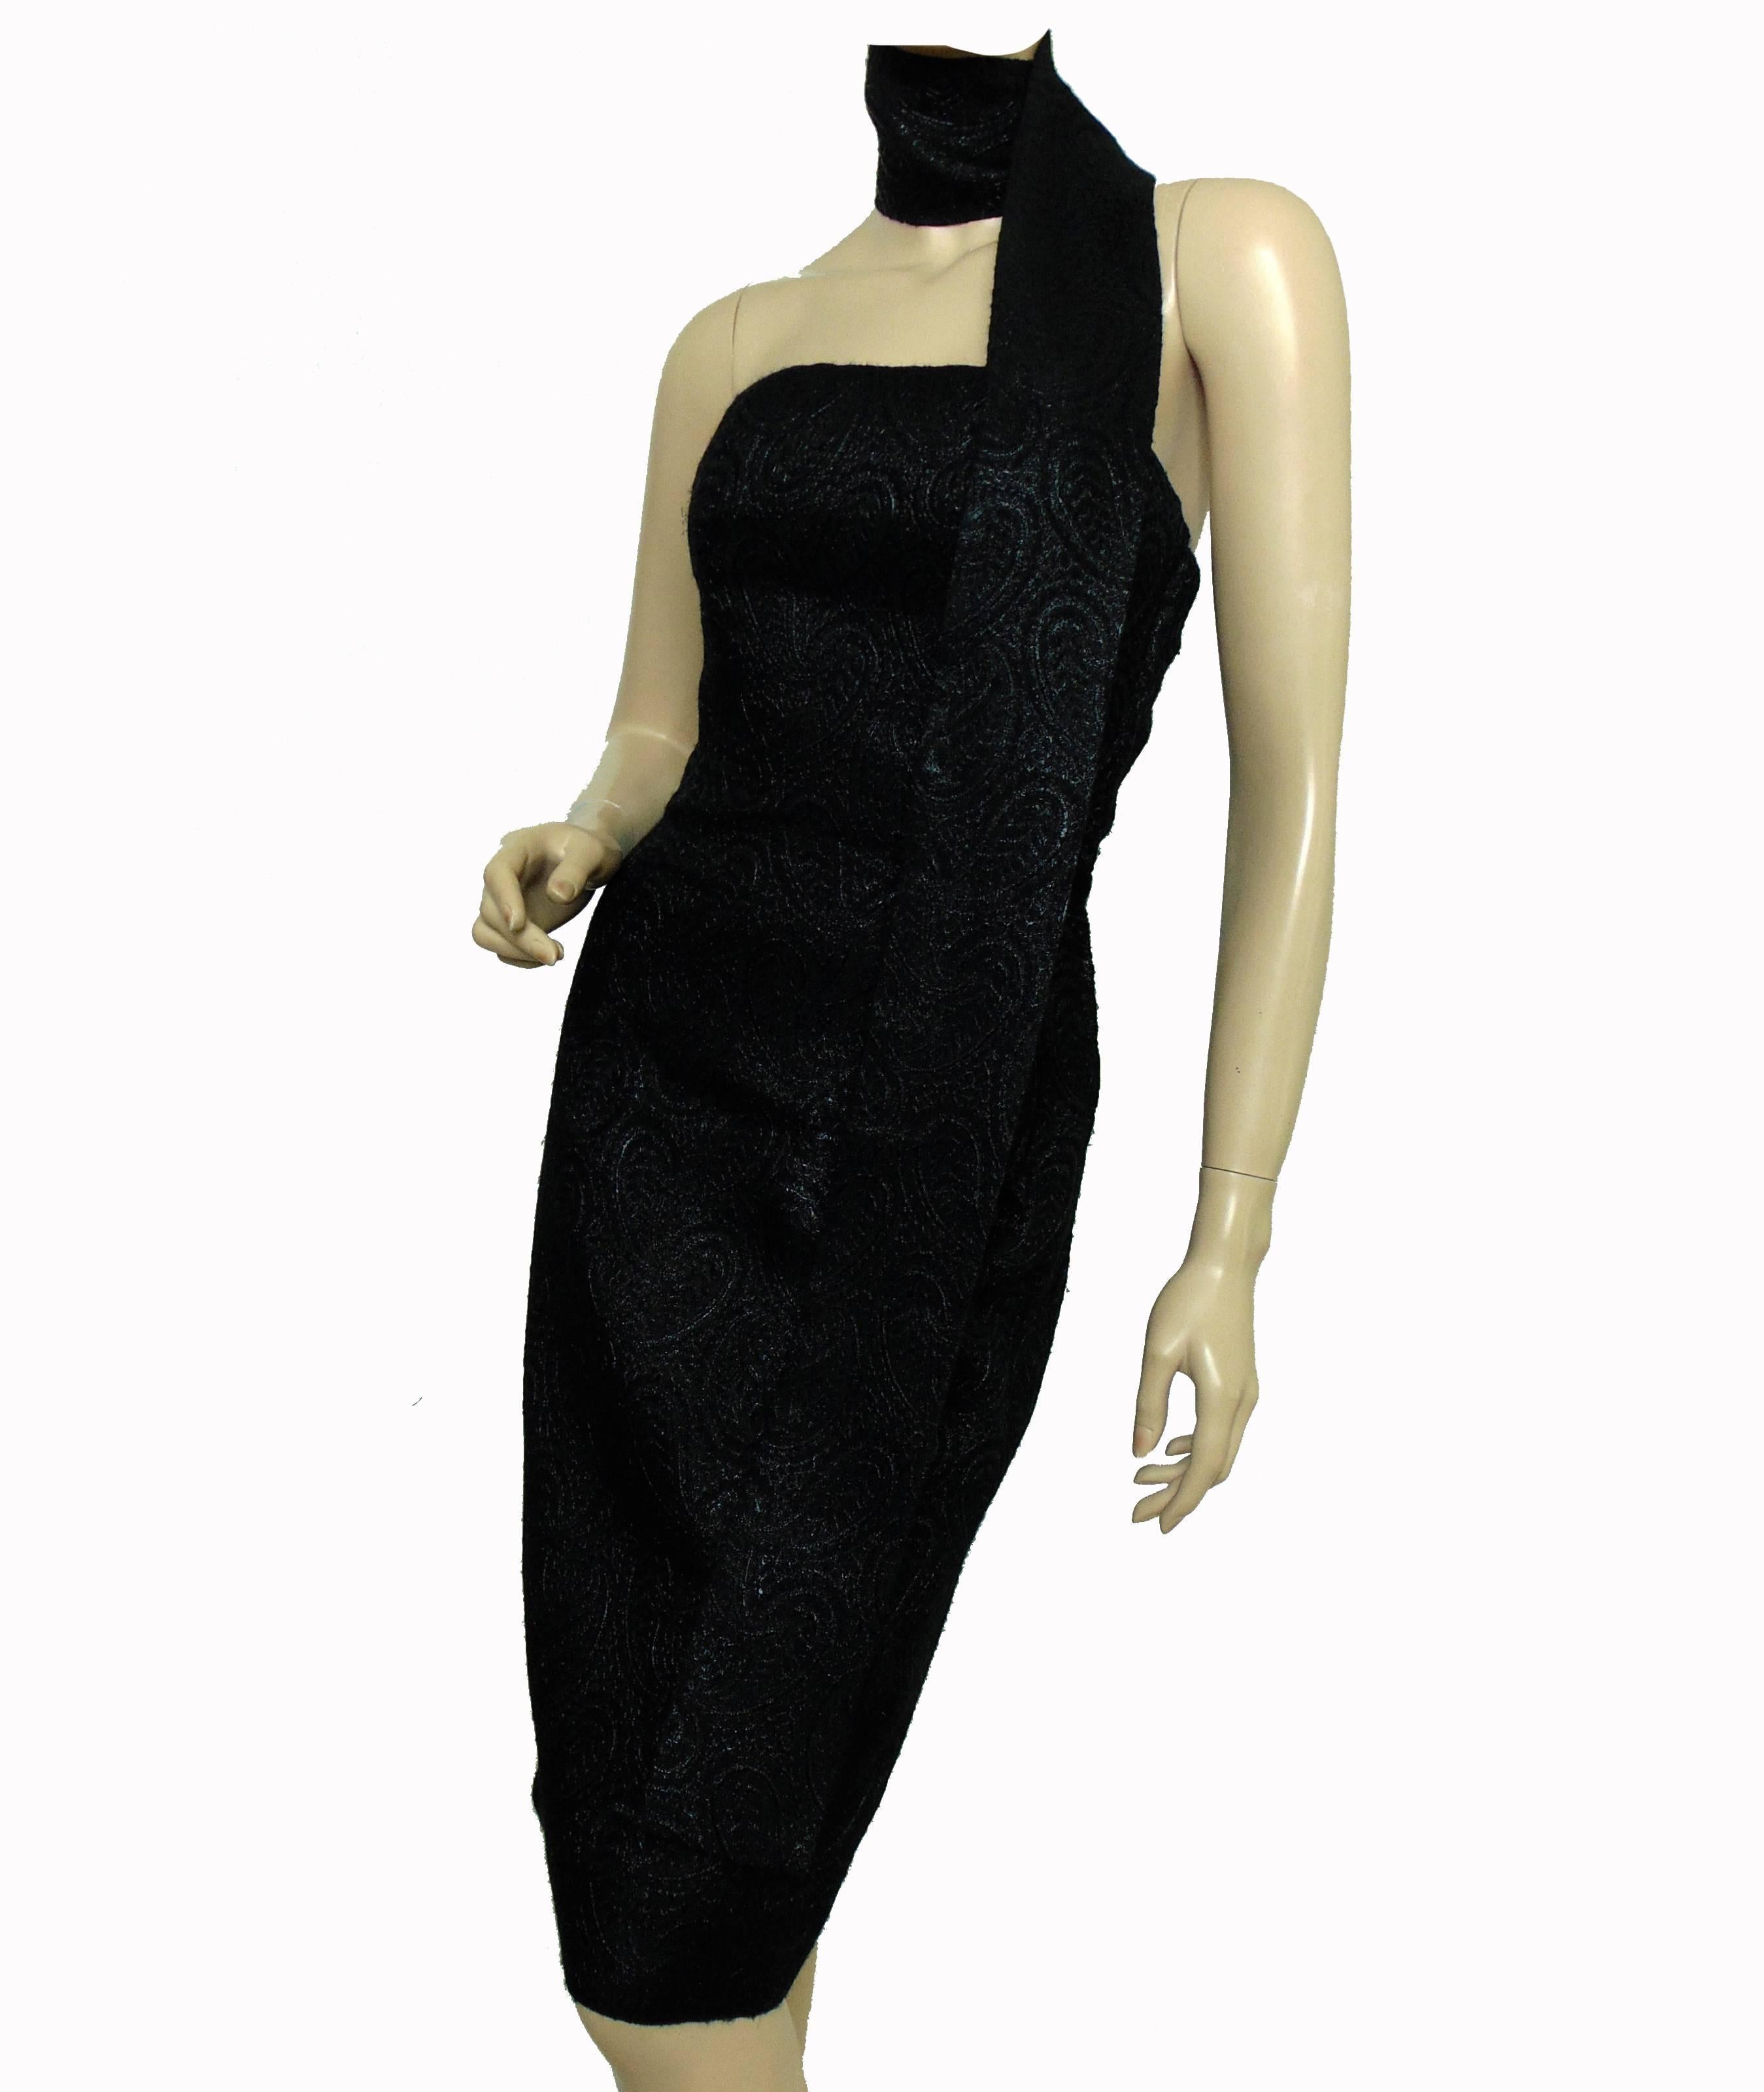 Givenchy Black Cocktail Dress with Wrap or Belt Paisley Lurex Silk, 1960s 3